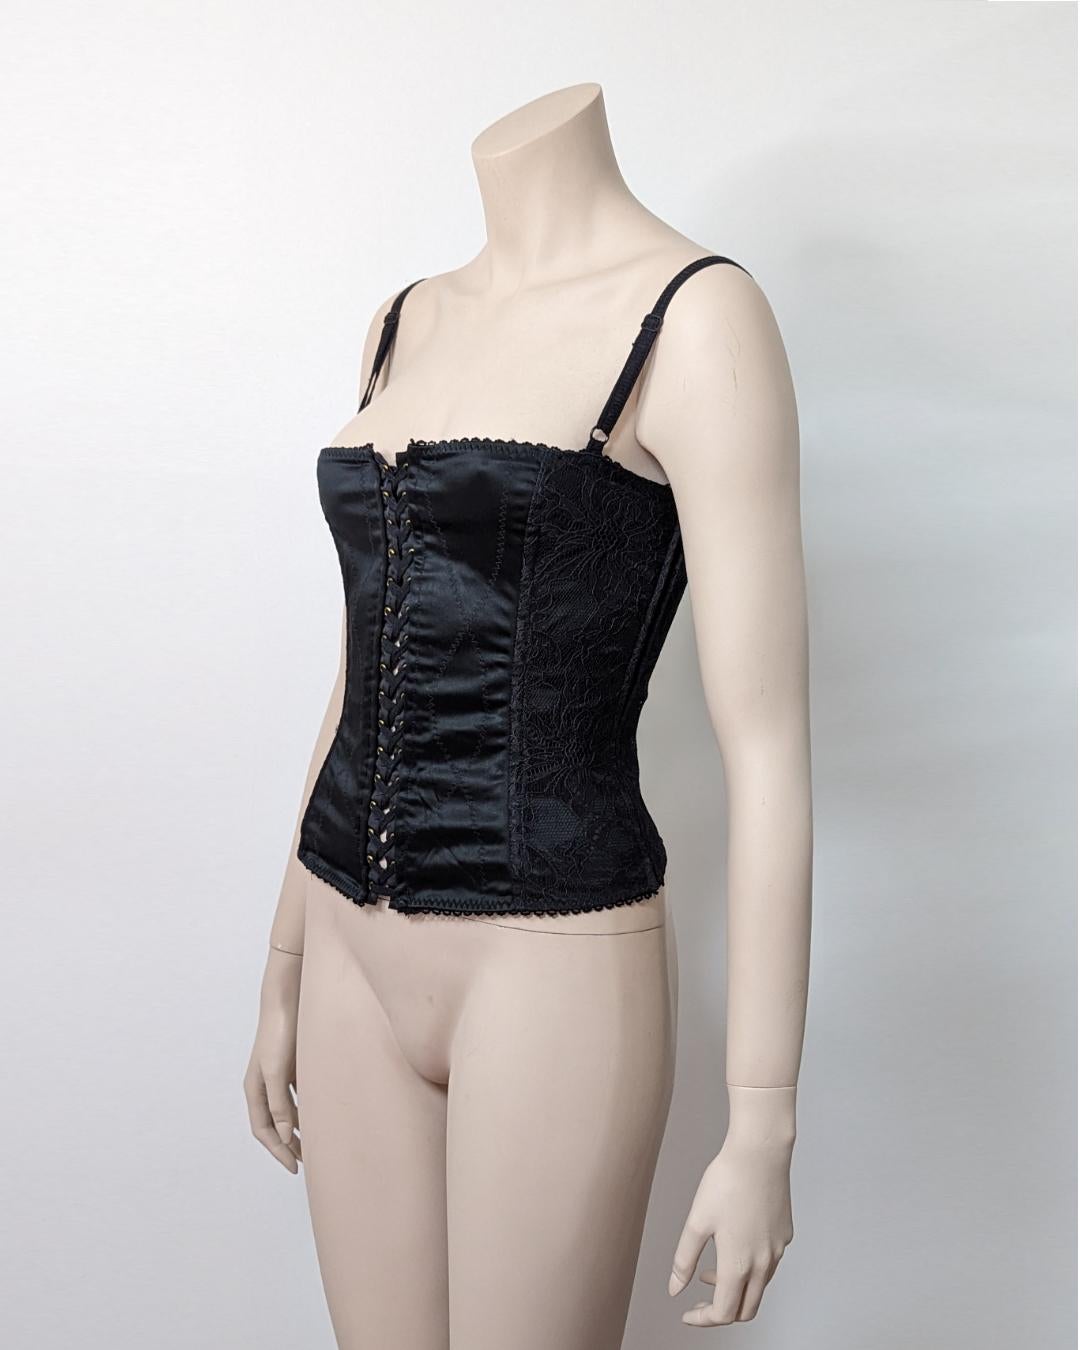 D&G top lace up bustier with black laces details. Circa 1990s. Rare.

· Alternating black satin and lace
· Criss cross zig zag top stiching
· Adjustable spaghettis straps
 

Fits XS S / Marked XS

Flat measurements : 

Breast :  39 cm
Waist :  32